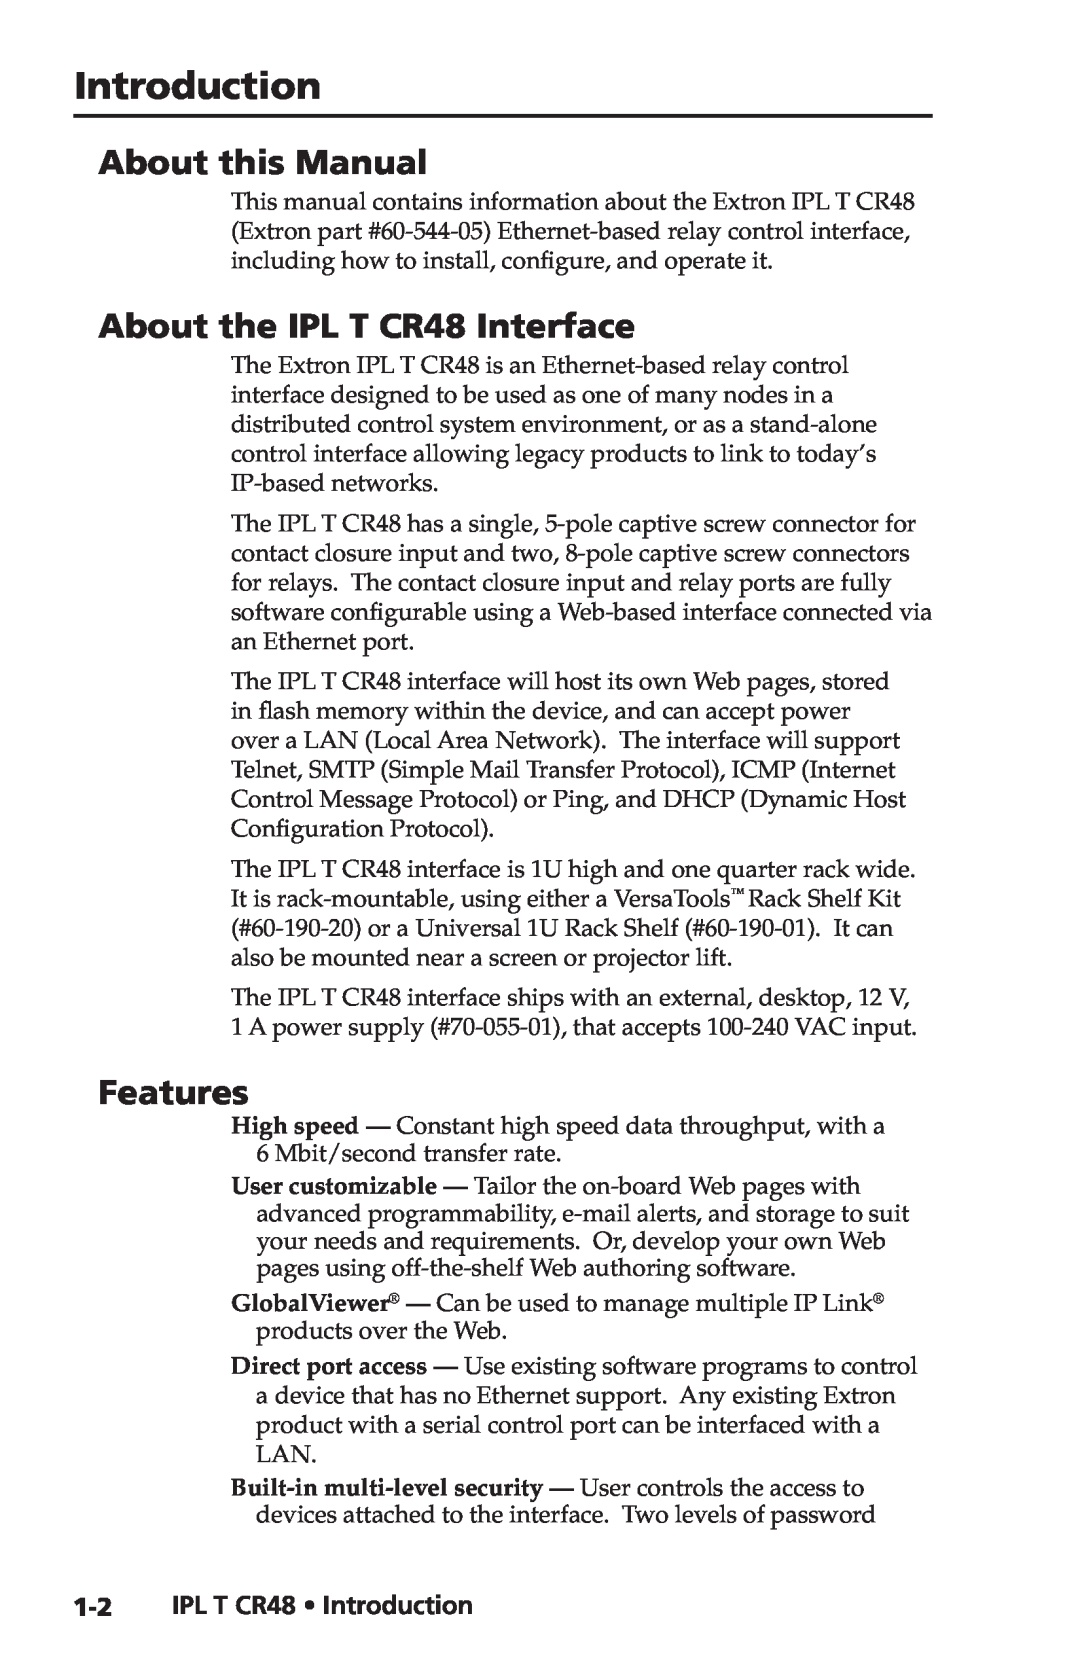 Extron electronic manual About this Manual, About the IPL T CR48 Interface, Features, IPL T CR48 Introduction 